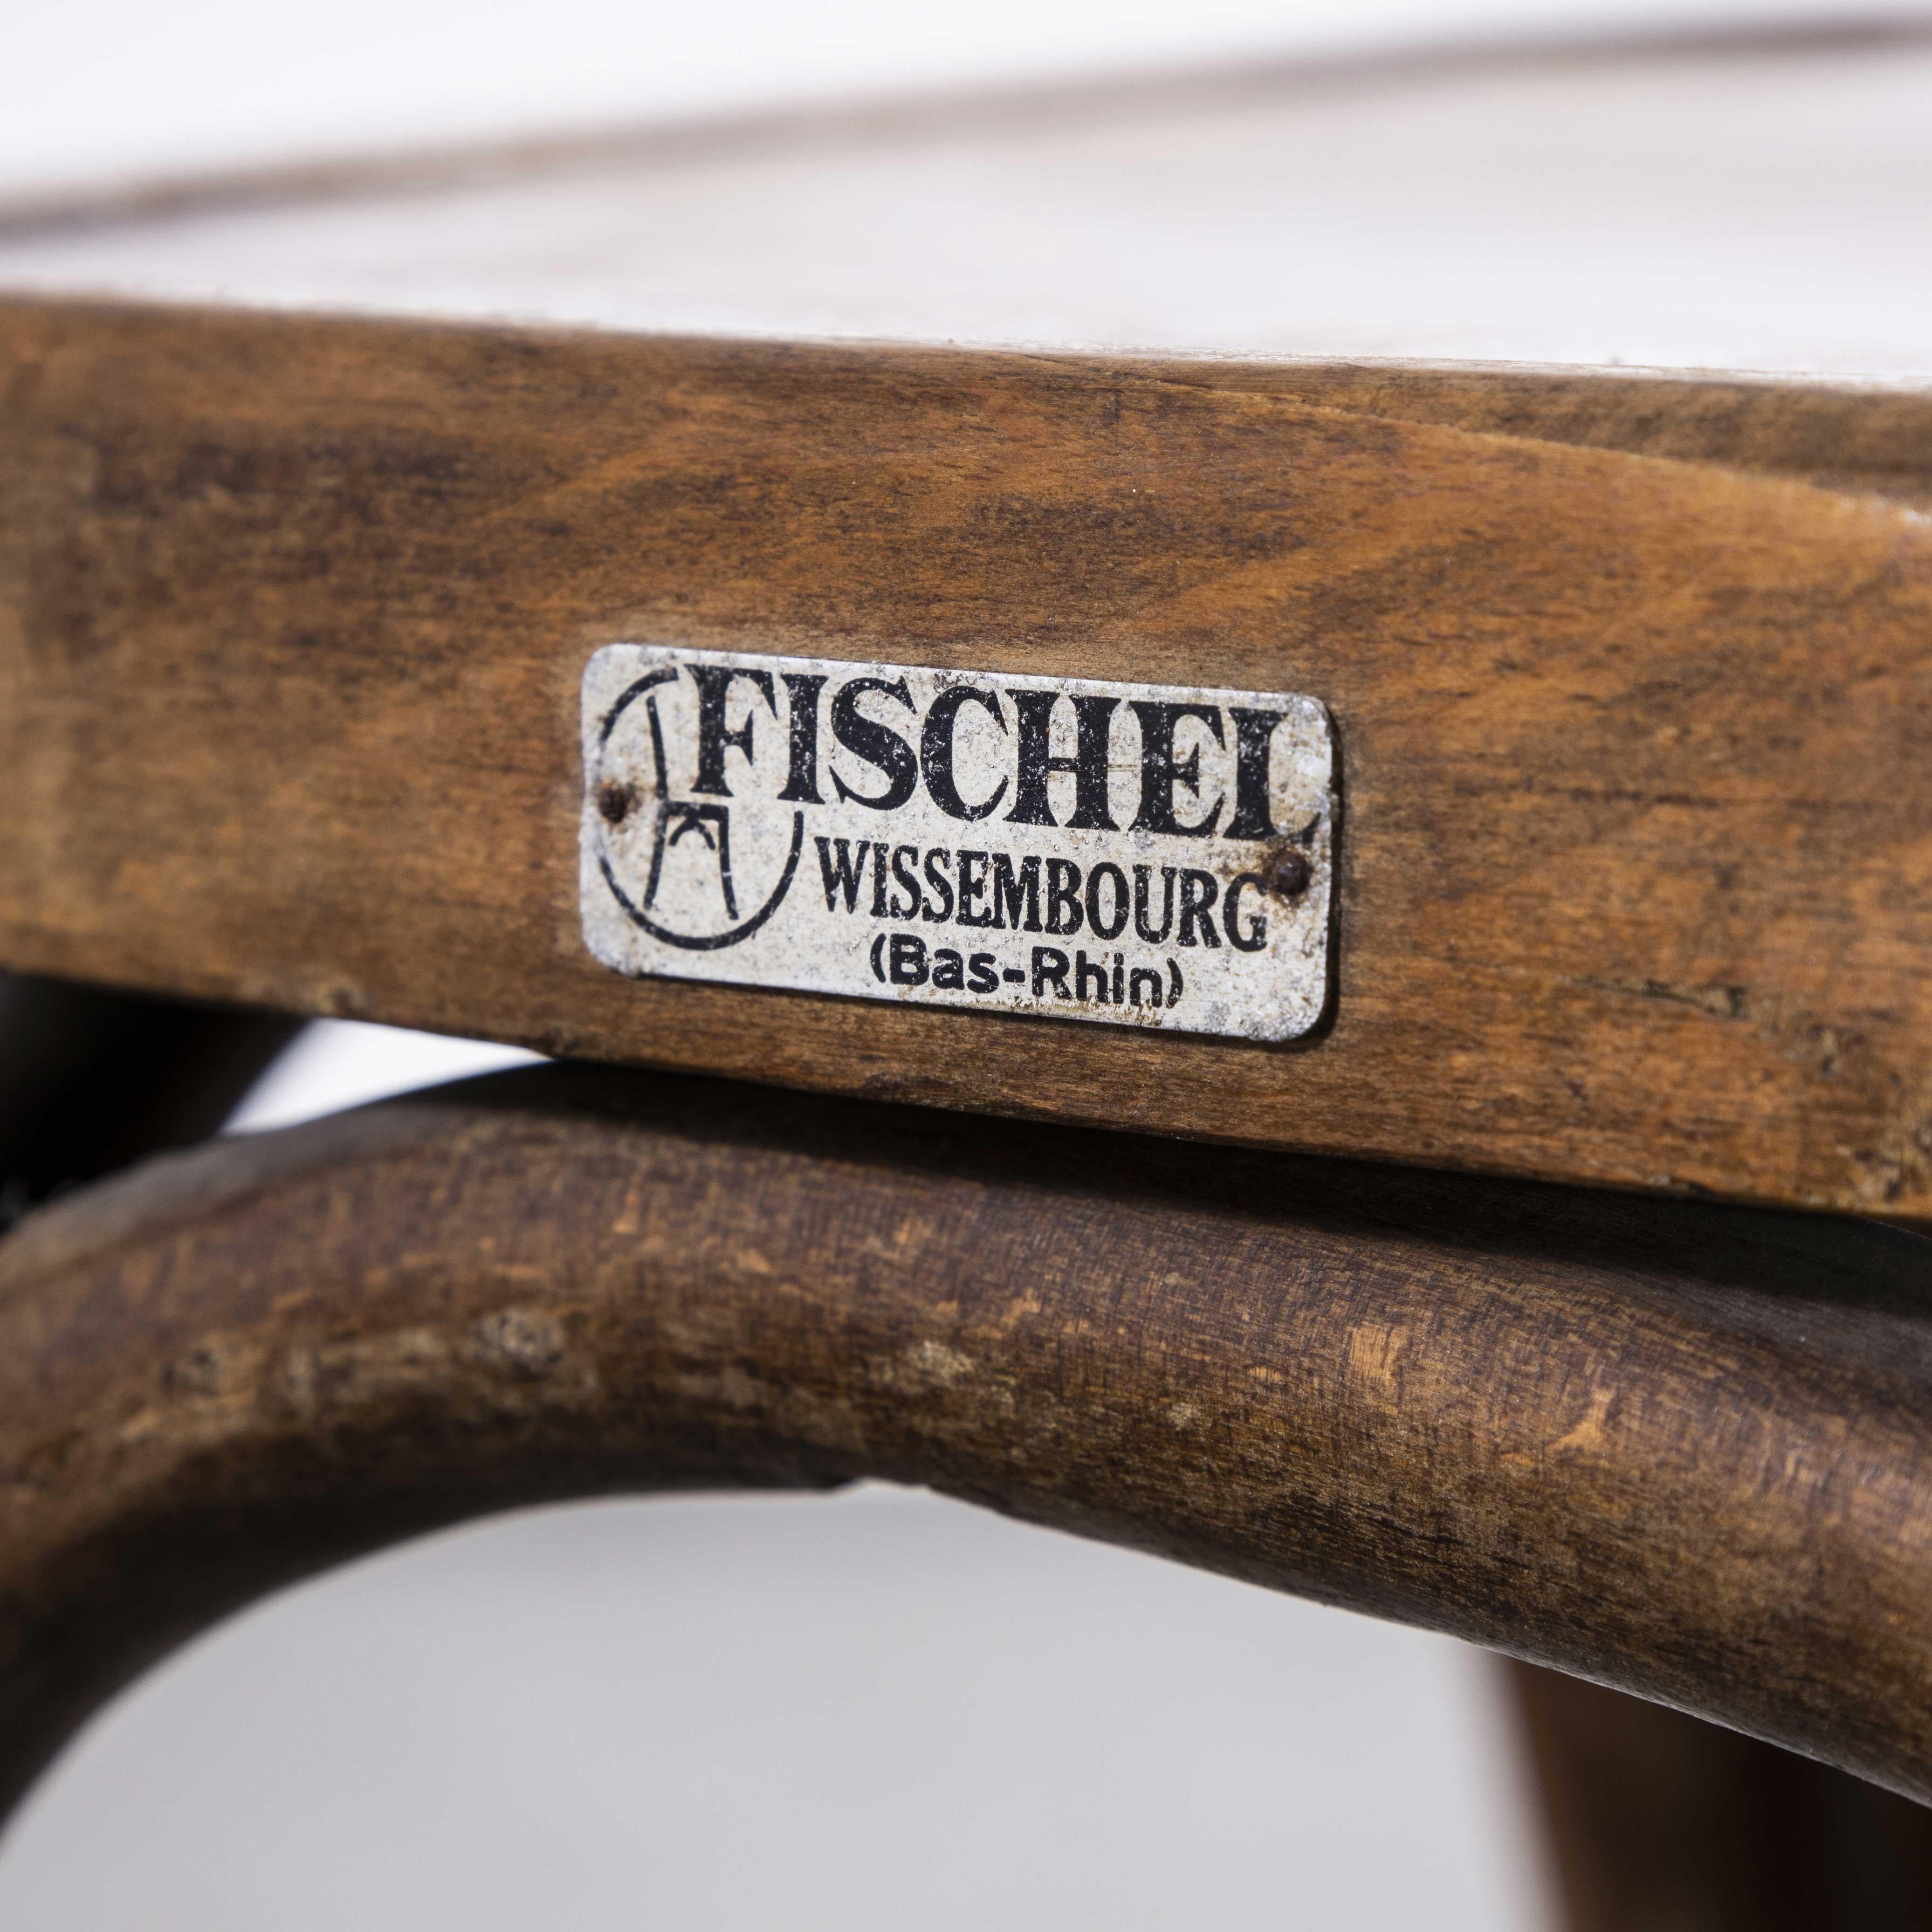 1940’s Fischel French Bentwood Dark Walnut Dining Chairs – Set Of Eight
1940’s Fischel French Bentwood Dark Walnut Dining Chairs – Set Of Eight. The process of steam bending .beech to create elegant chairs was discovered and developed by Thonet,